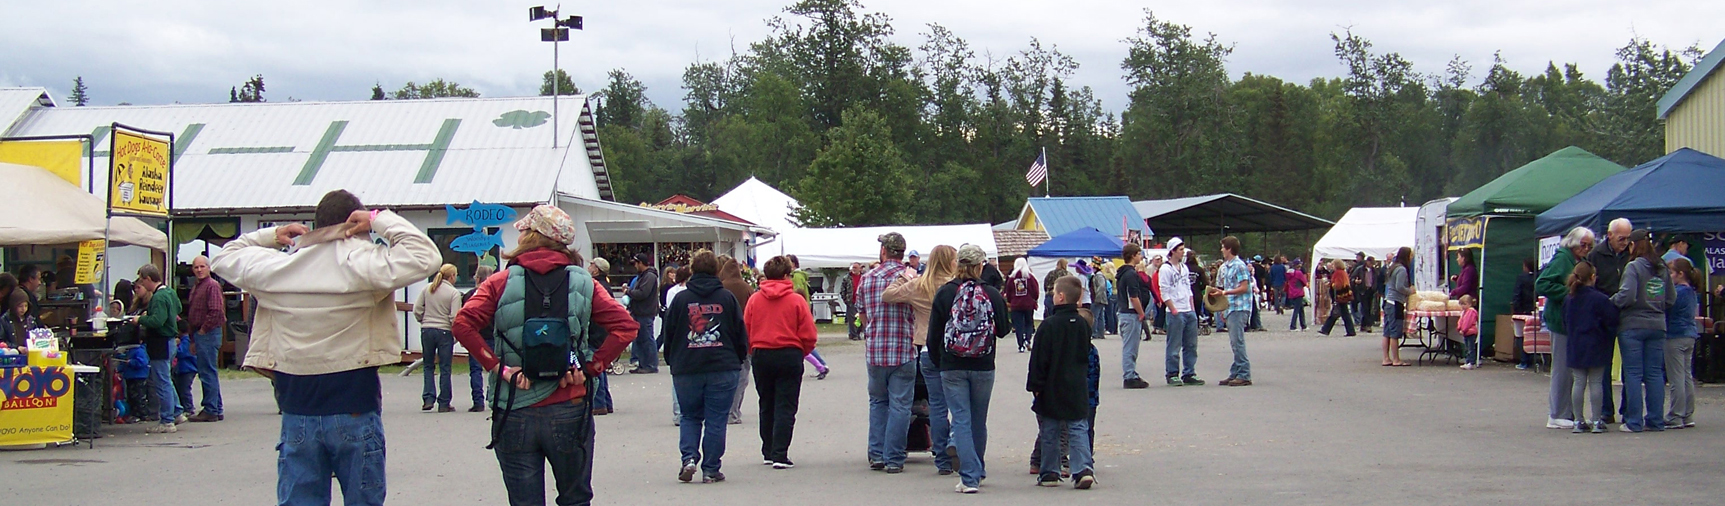 Visitors walk the grounds last year at the Kenai Peninsula Fair. The annual August tradition opens at 9:30 a.m. Friday and runs through Sunday. The fair closes 9 p.m. Friday and Saturday and 5 p.m. Sunday. This year’s theme is “Clammin’ It Up.” Admission is $10 a day for adults, $5 for youth 6-12 and seniors 65 and older or a three-day pass for $25 adults, $10 youth and seniors. Friday is Red Shirt Friday to “remember everyone deployed.” Back this year are the popular pig races. For a fair schedule, go to kenaipeninsulafair.com.-Photo by McKibben Jackinsky, Homer News